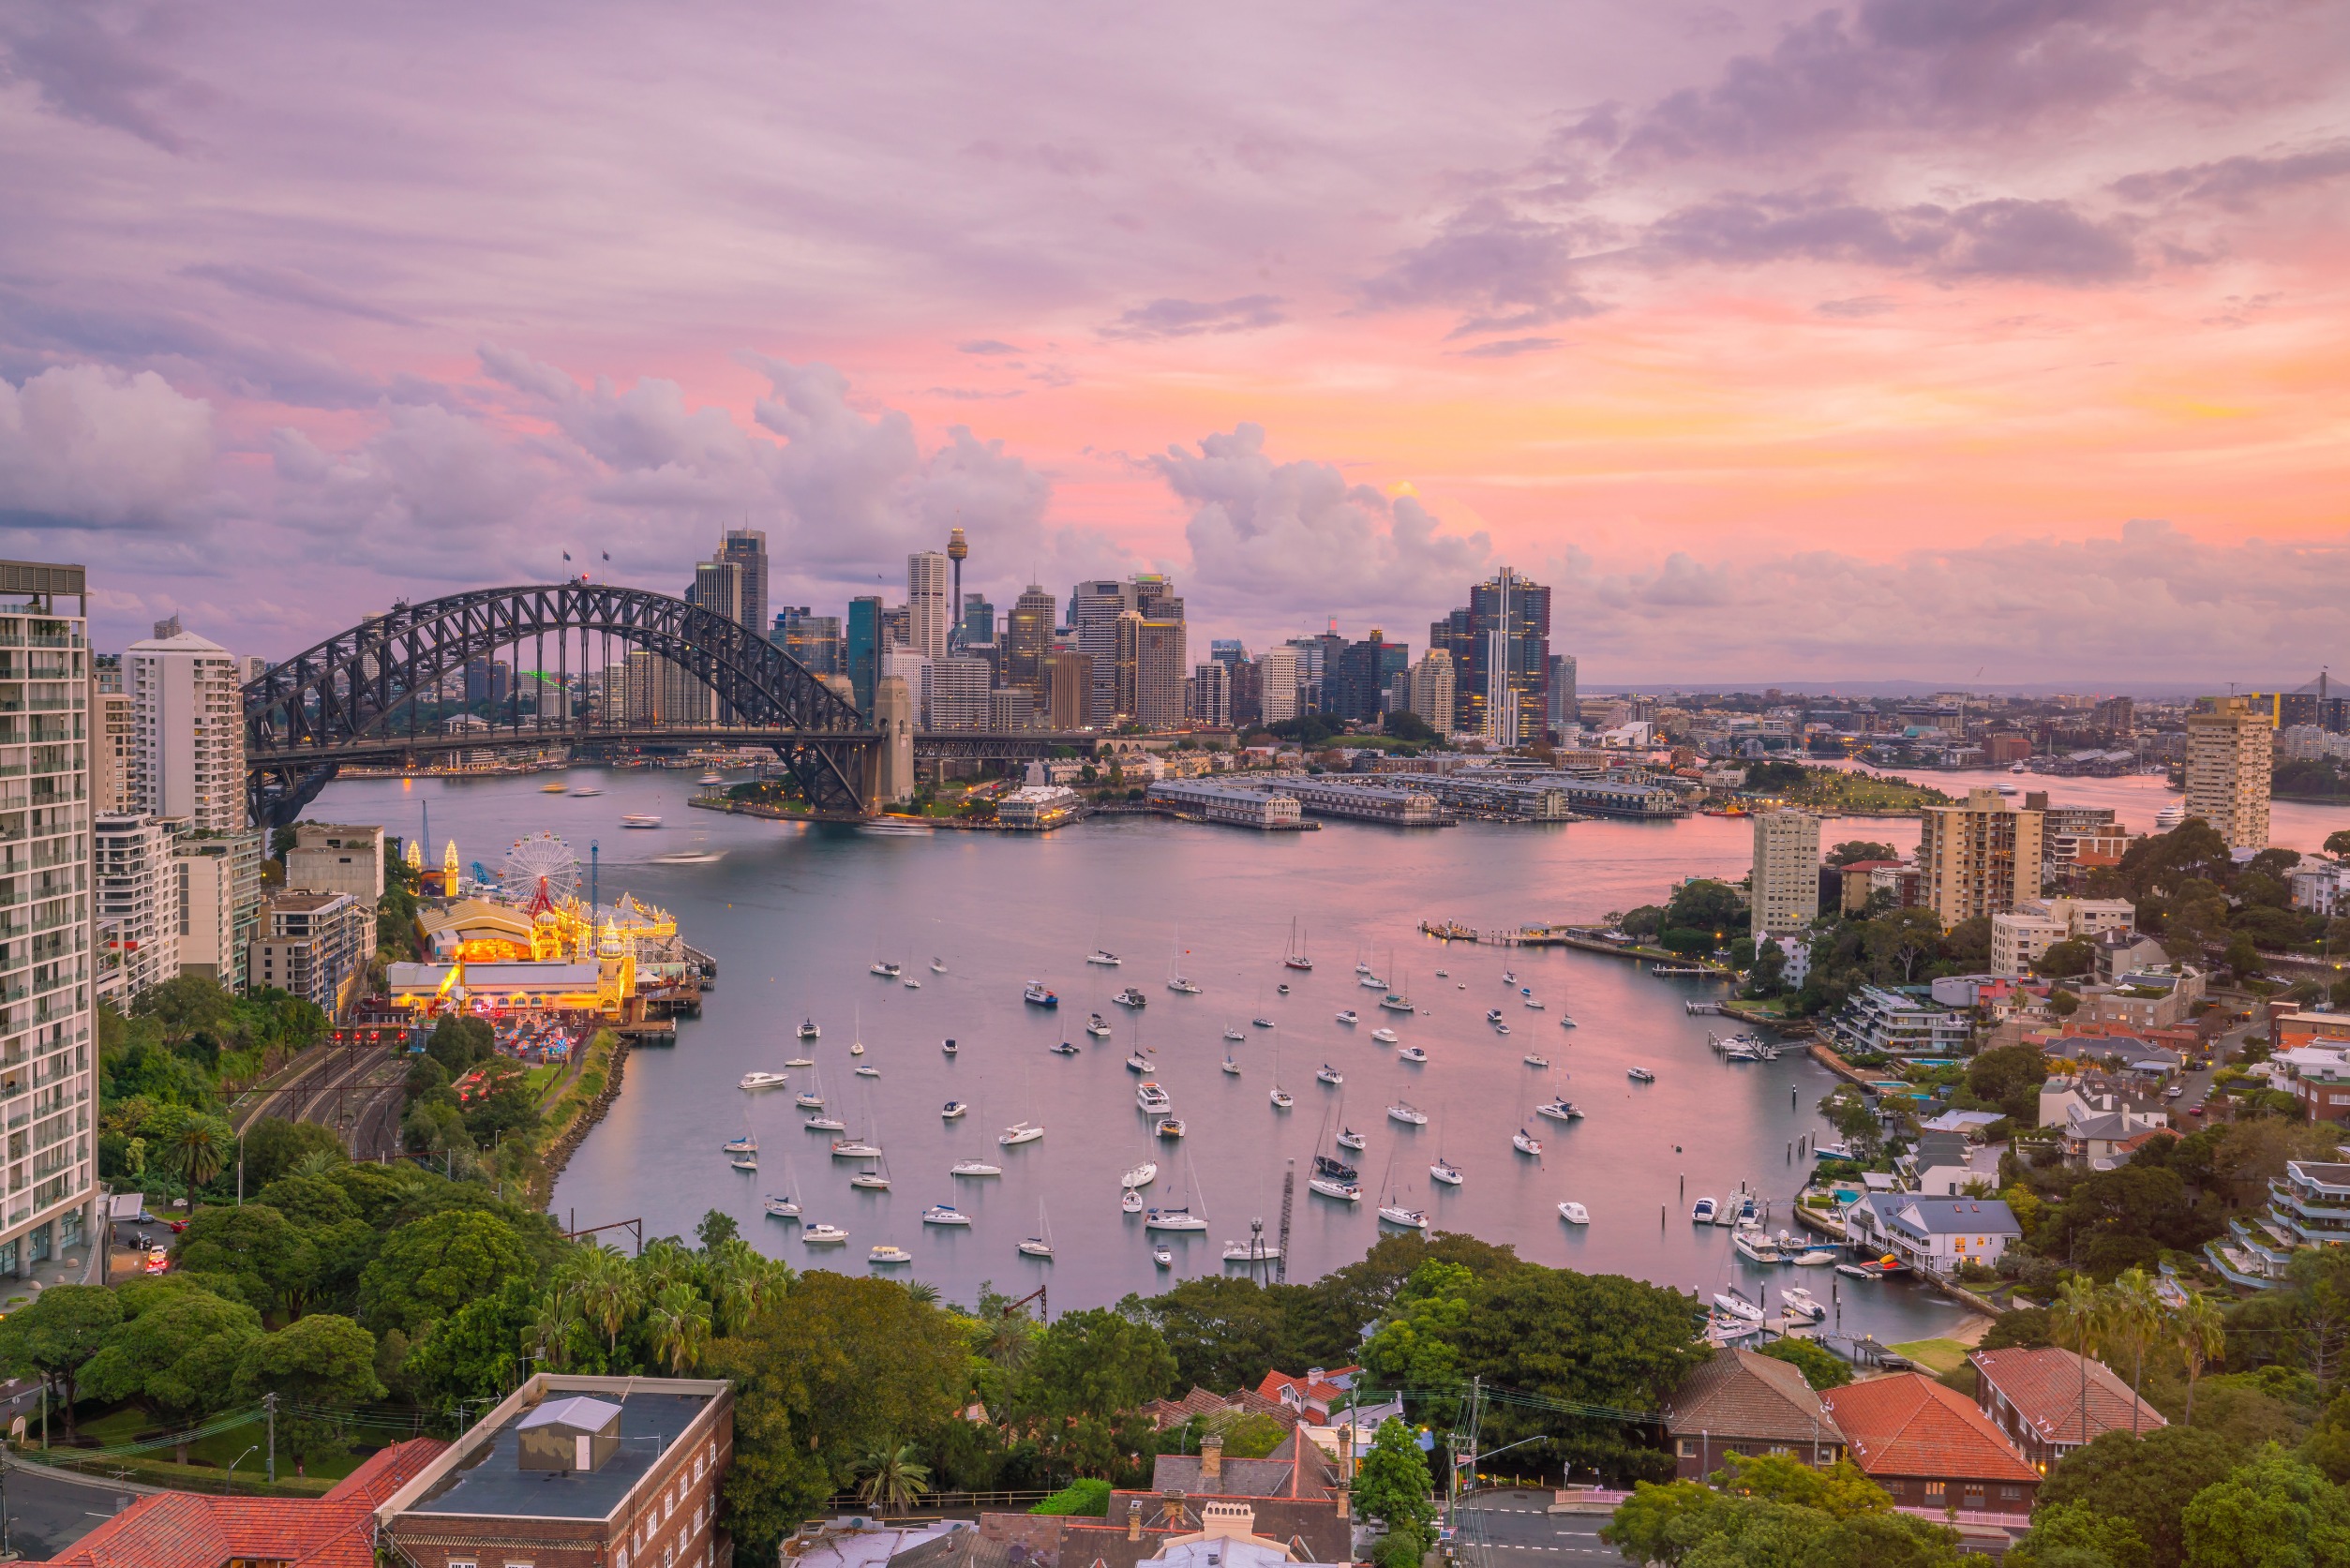 Sustainability Fellowships for Professionals and Scholars can allow you to pursue research in places like Sydney, Australia.